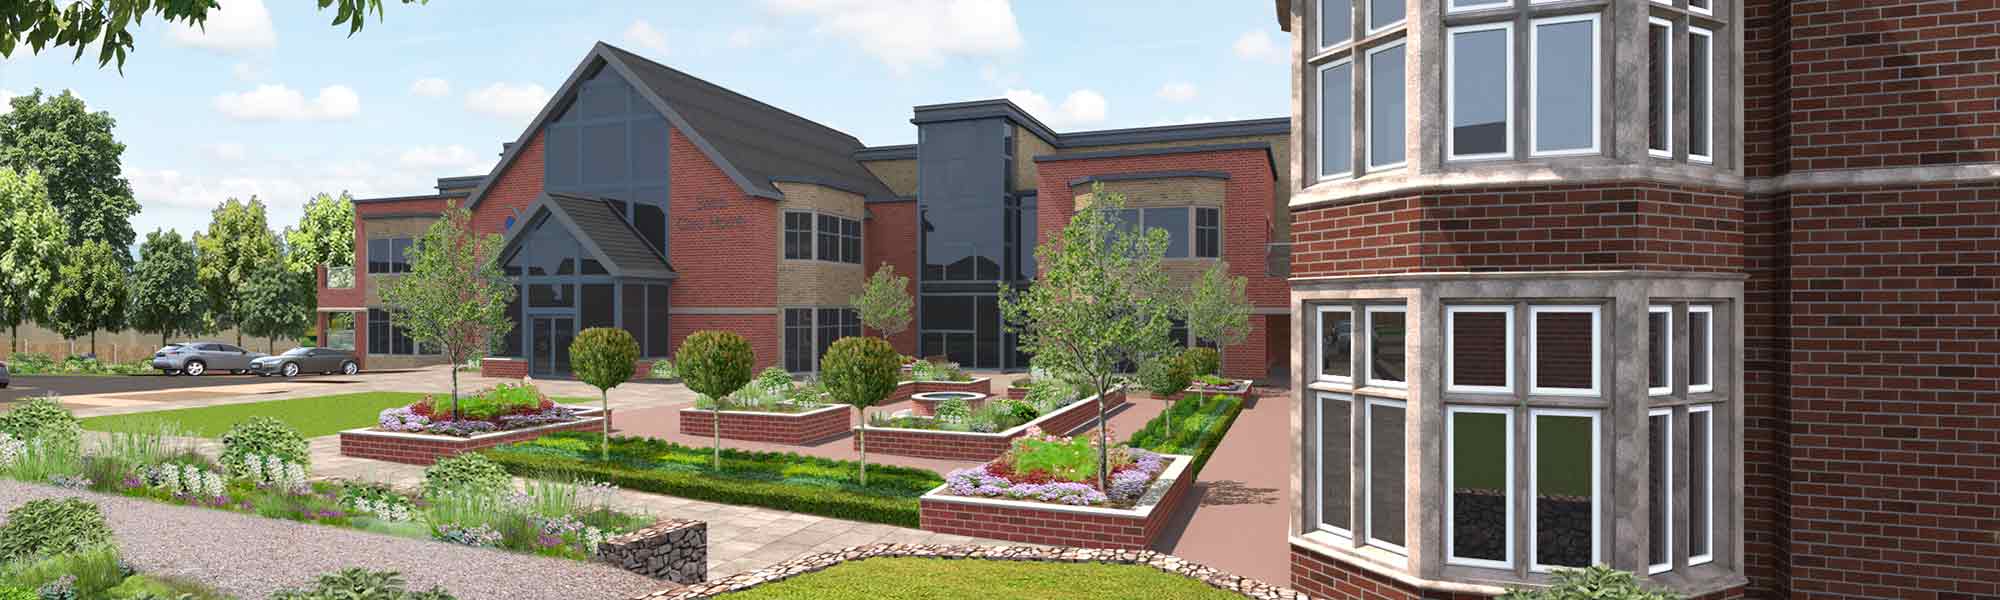 Avery Park Care Home in Kettering scheduled to open in Autumn 2020 banner hero